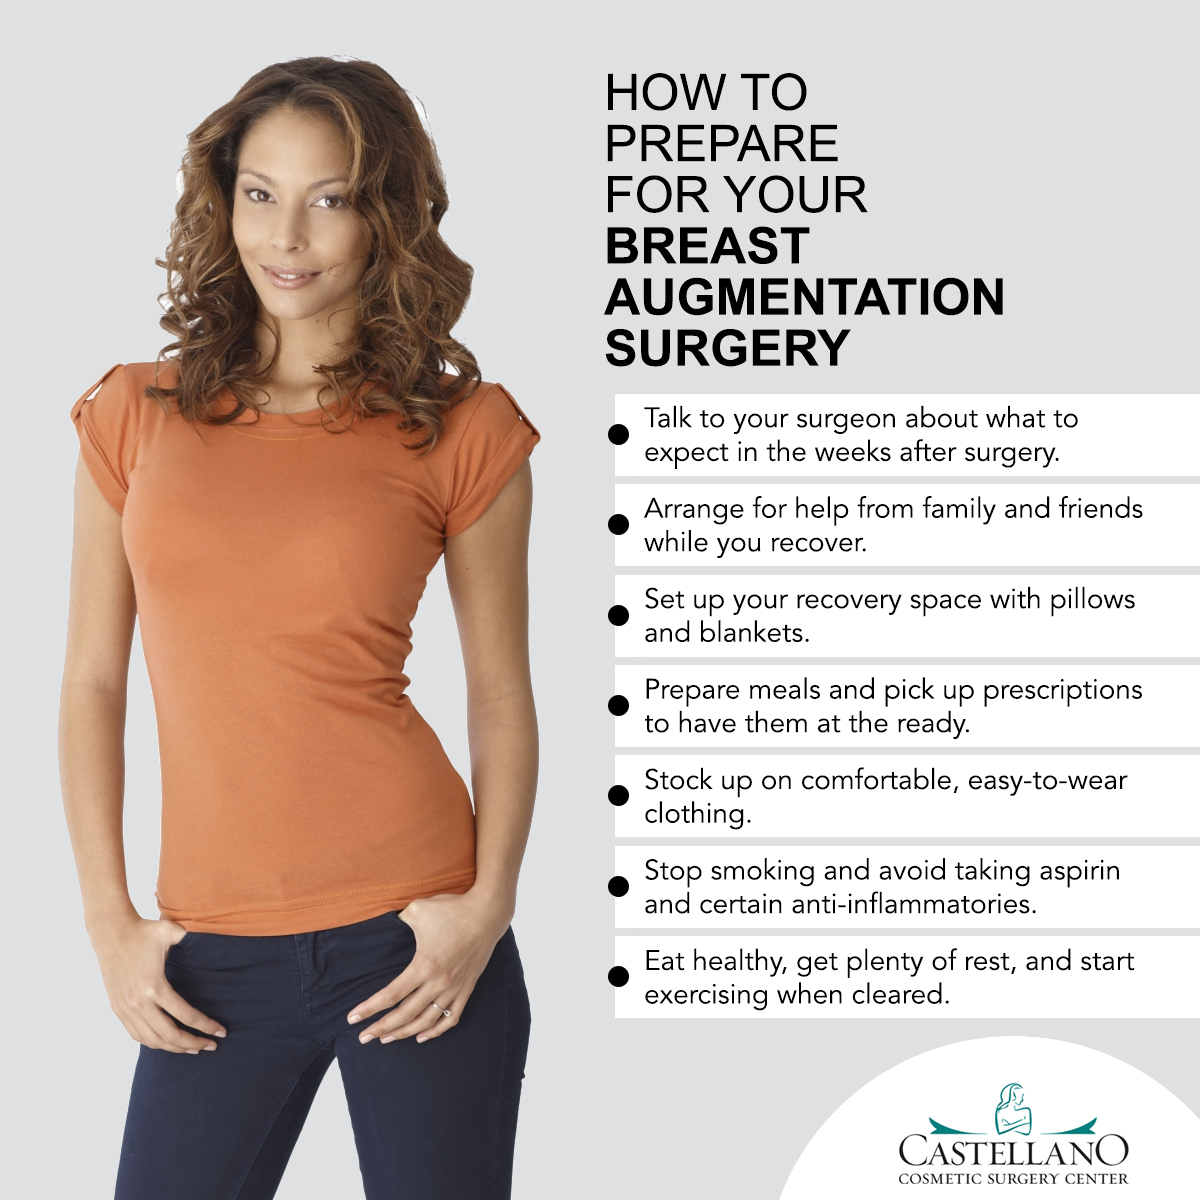 How to Prepare for Your Breast Augmentation Surgery [Infographic]